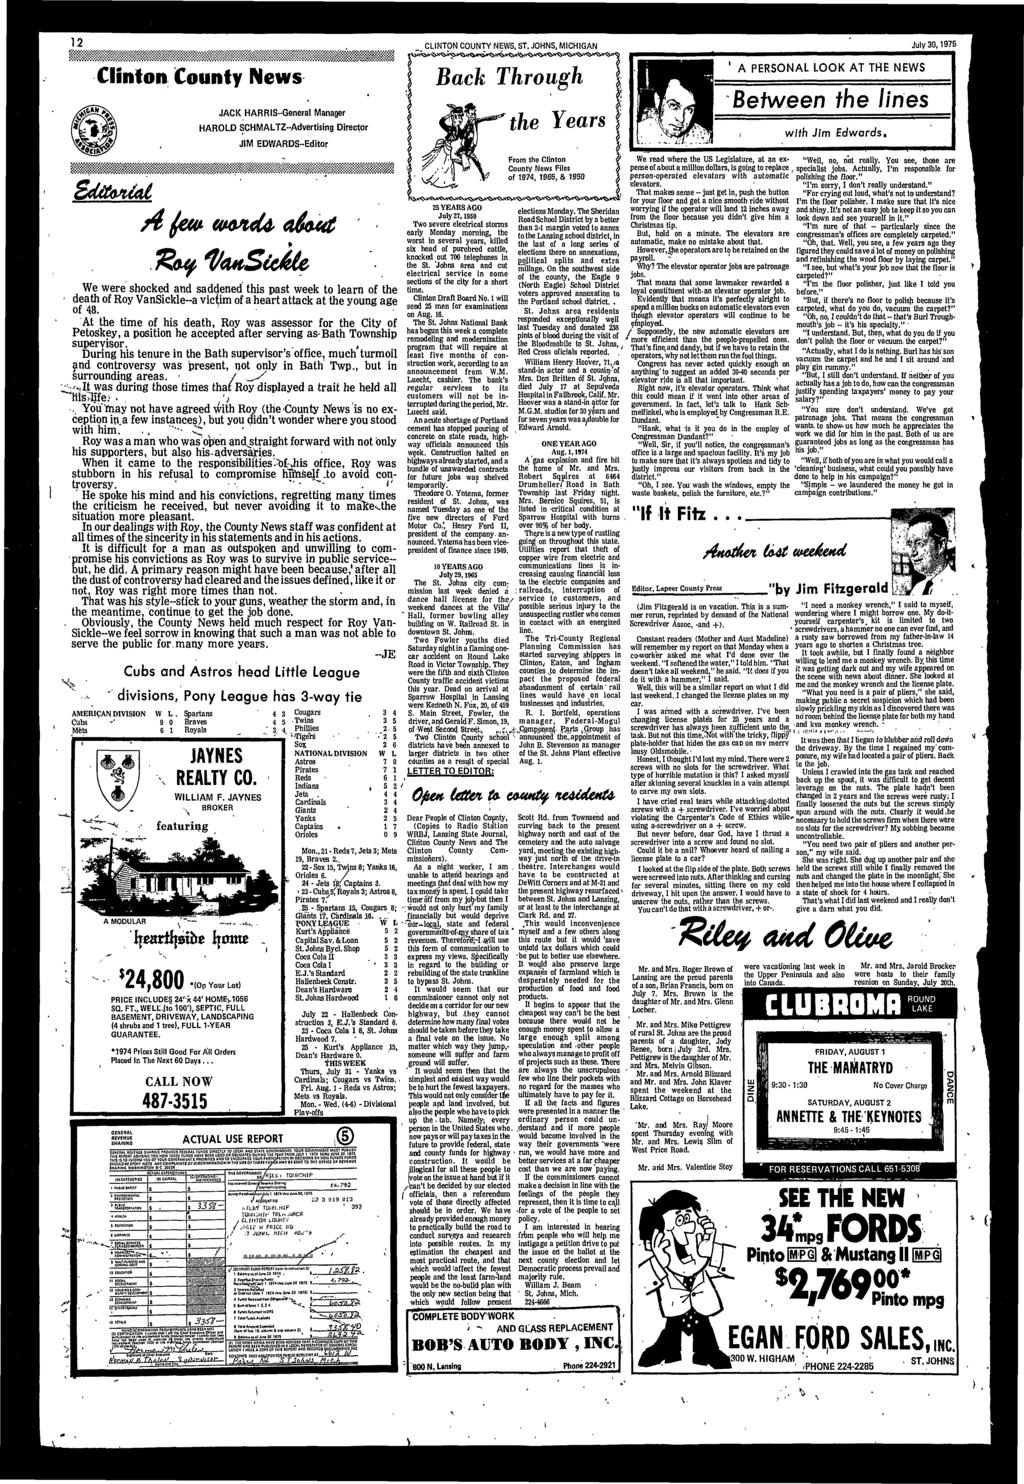 H* 2 _ CLINTON COUNTY NEWS, ST, JOHNS, MICHIGAN July 30,975 Clnton County News Sdtfofal AMERICAN DIVISION Cubs Mets rvt JACK HARRIS-General Manager HAROLD SCHMALTZ-Advertsng Drector JIM EDWARDS-Edtor